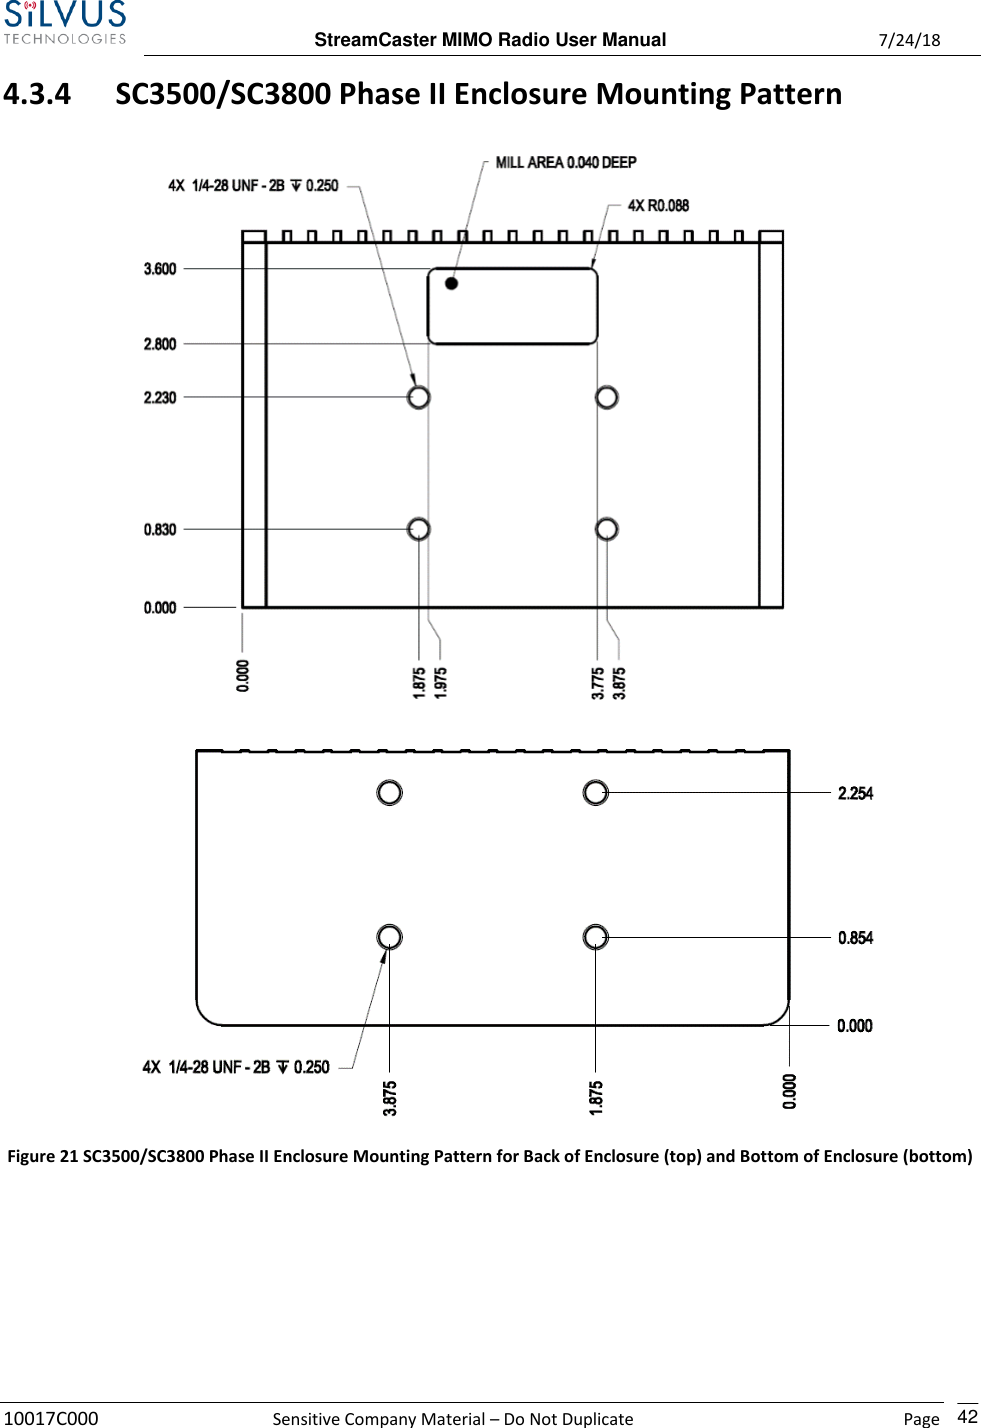  StreamCaster MIMO Radio User Manual  7/24/18 10017C000  Sensitive Company Material – Do Not Duplicate    Page    42 4.3.4 SC3500/SC3800 Phase II Enclosure Mounting Pattern   Figure 21 SC3500/SC3800 Phase II Enclosure Mounting Pattern for Back of Enclosure (top) and Bottom of Enclosure (bottom)  